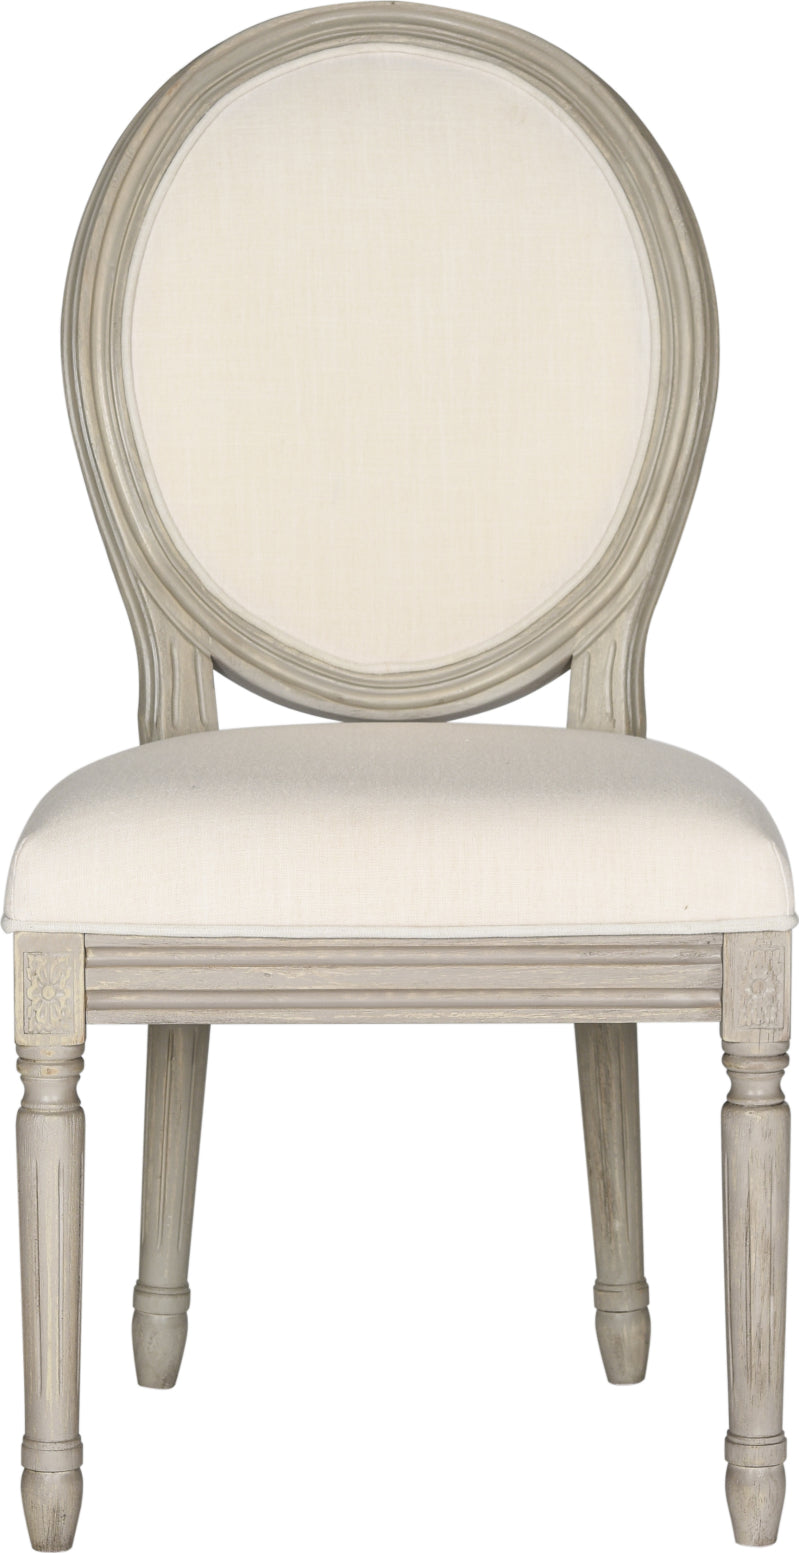 Safavieh Holloway 19''H French Brasserie Linen Oval Side Chair Light Beige and Rustic Grey Furniture main image